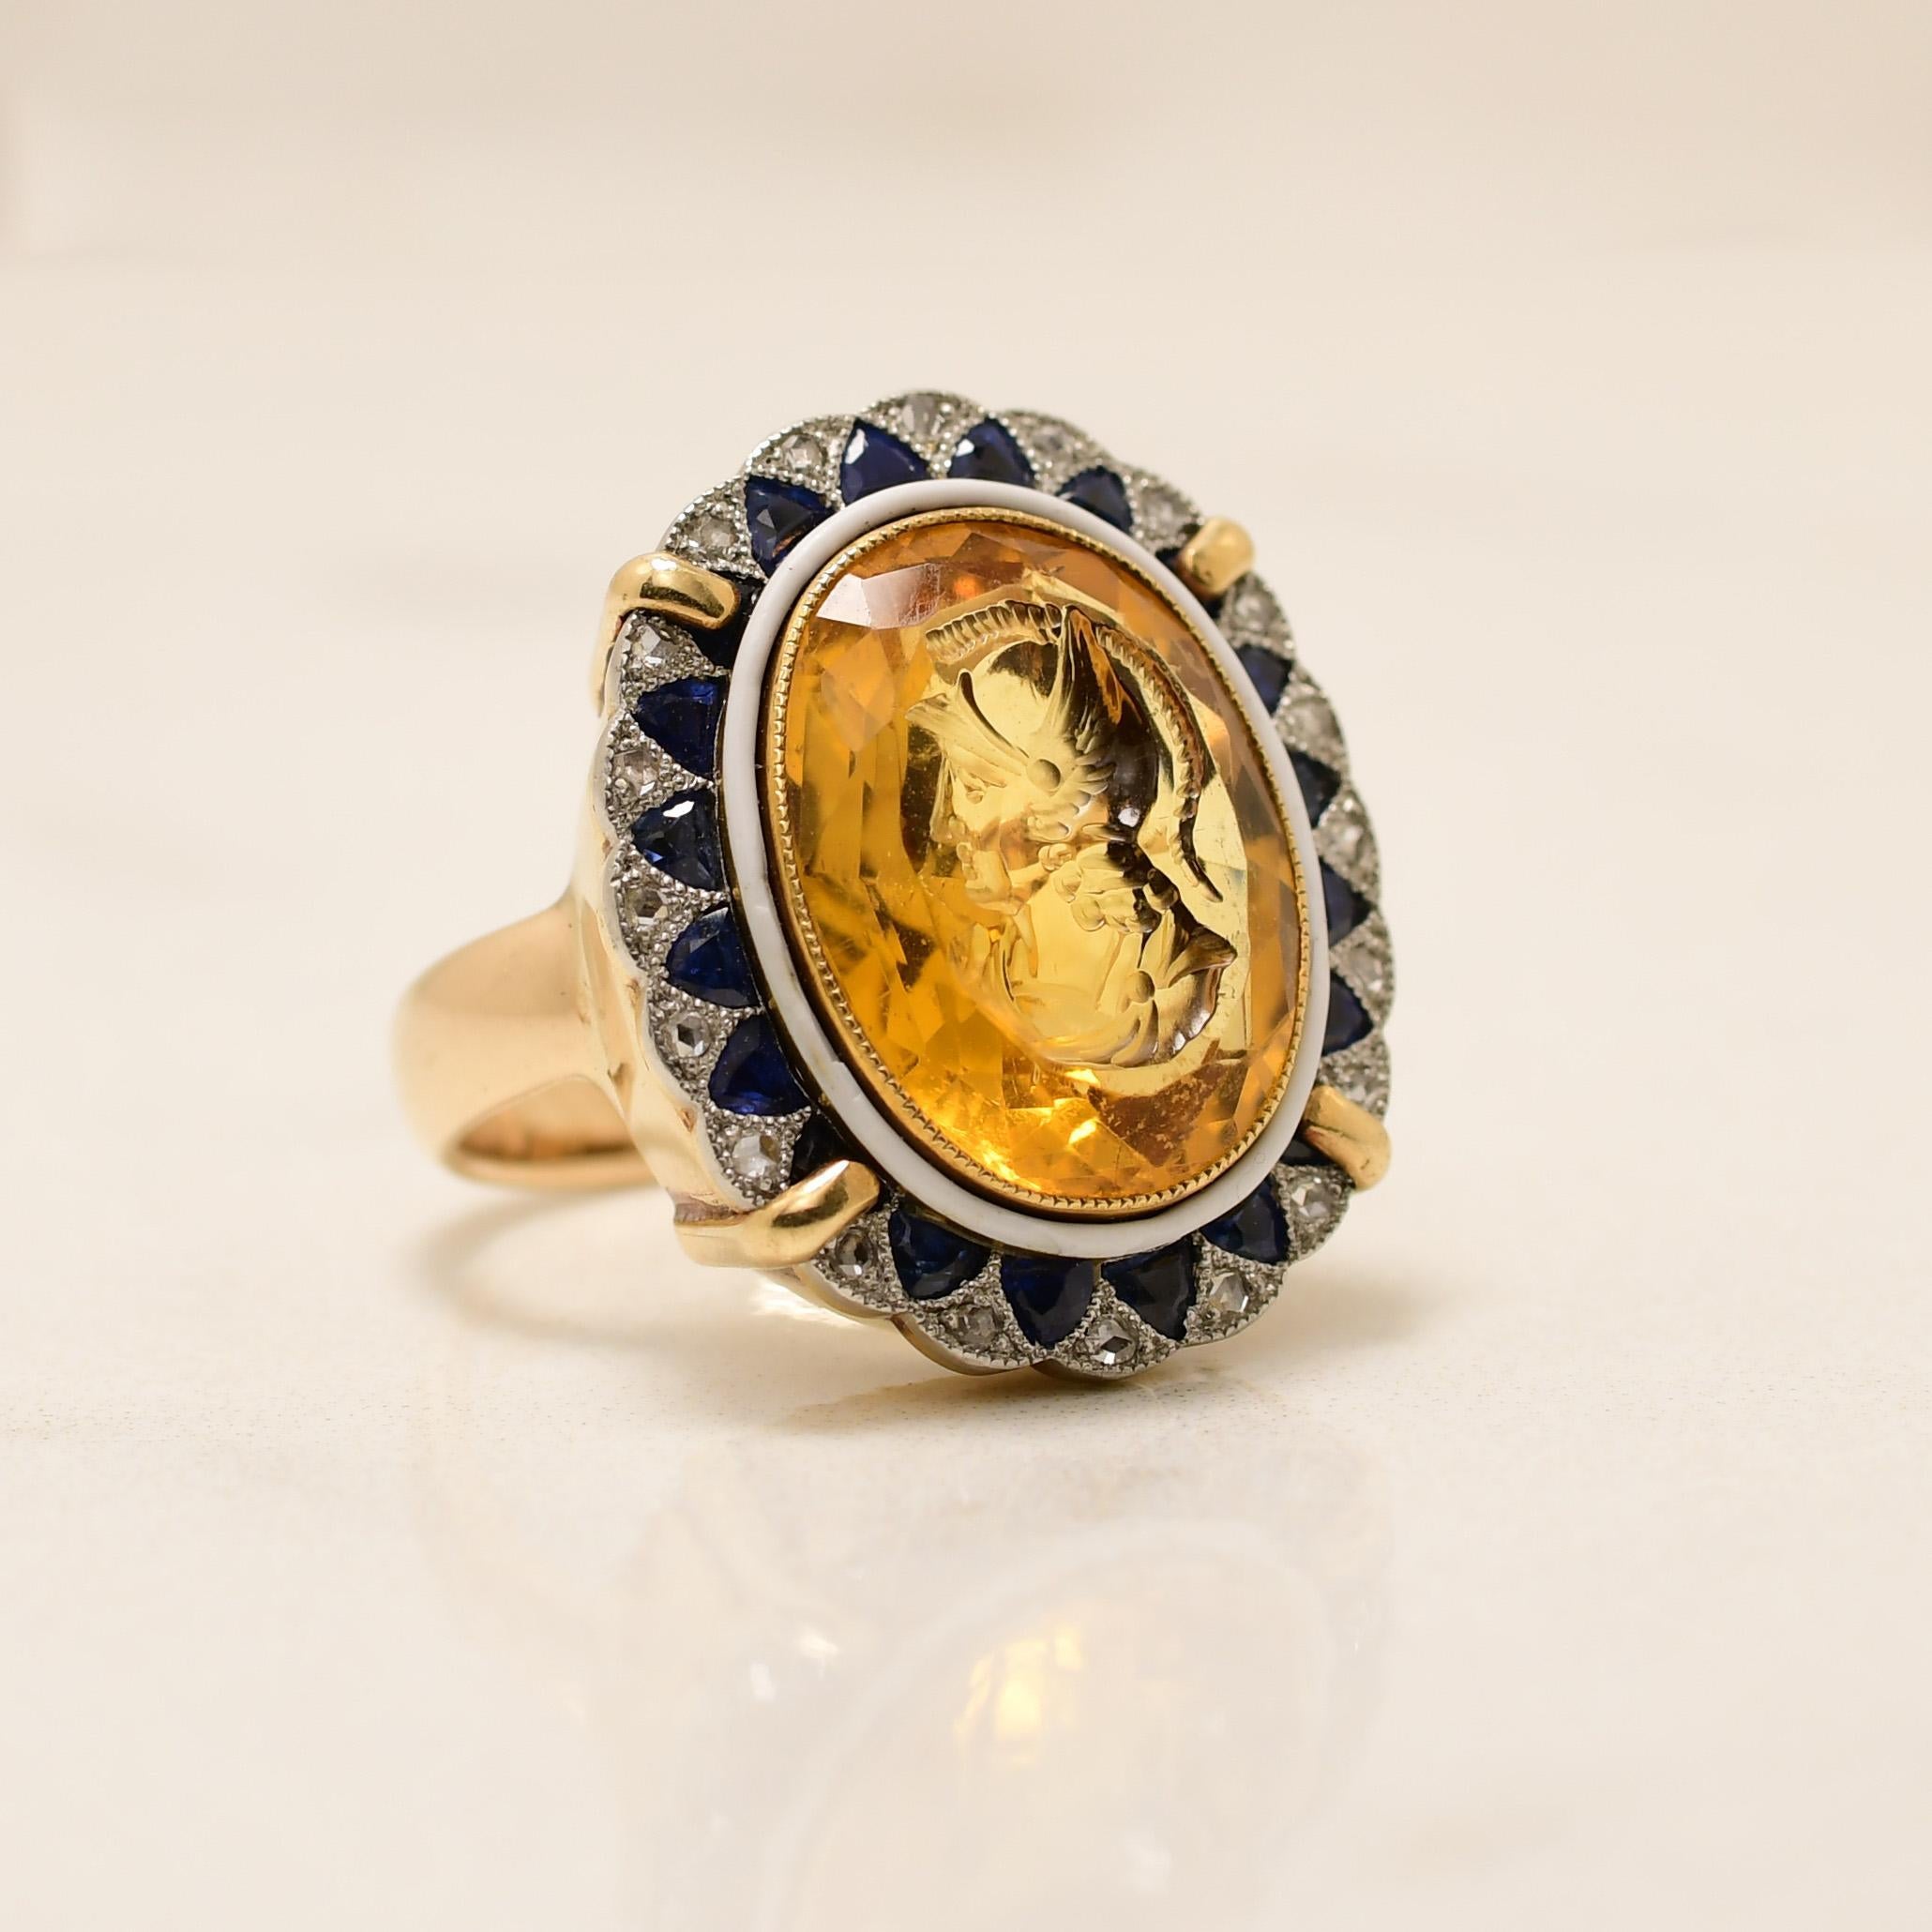 Here we have a uniquely bold treasure. Crafted in 14K yellow gold and platinum, the straight shanks hold a delicate scalloped edge halo. Uniquely done this halo is made up of single cut diamonds and rounded tris of deep blue sapphires. In the center